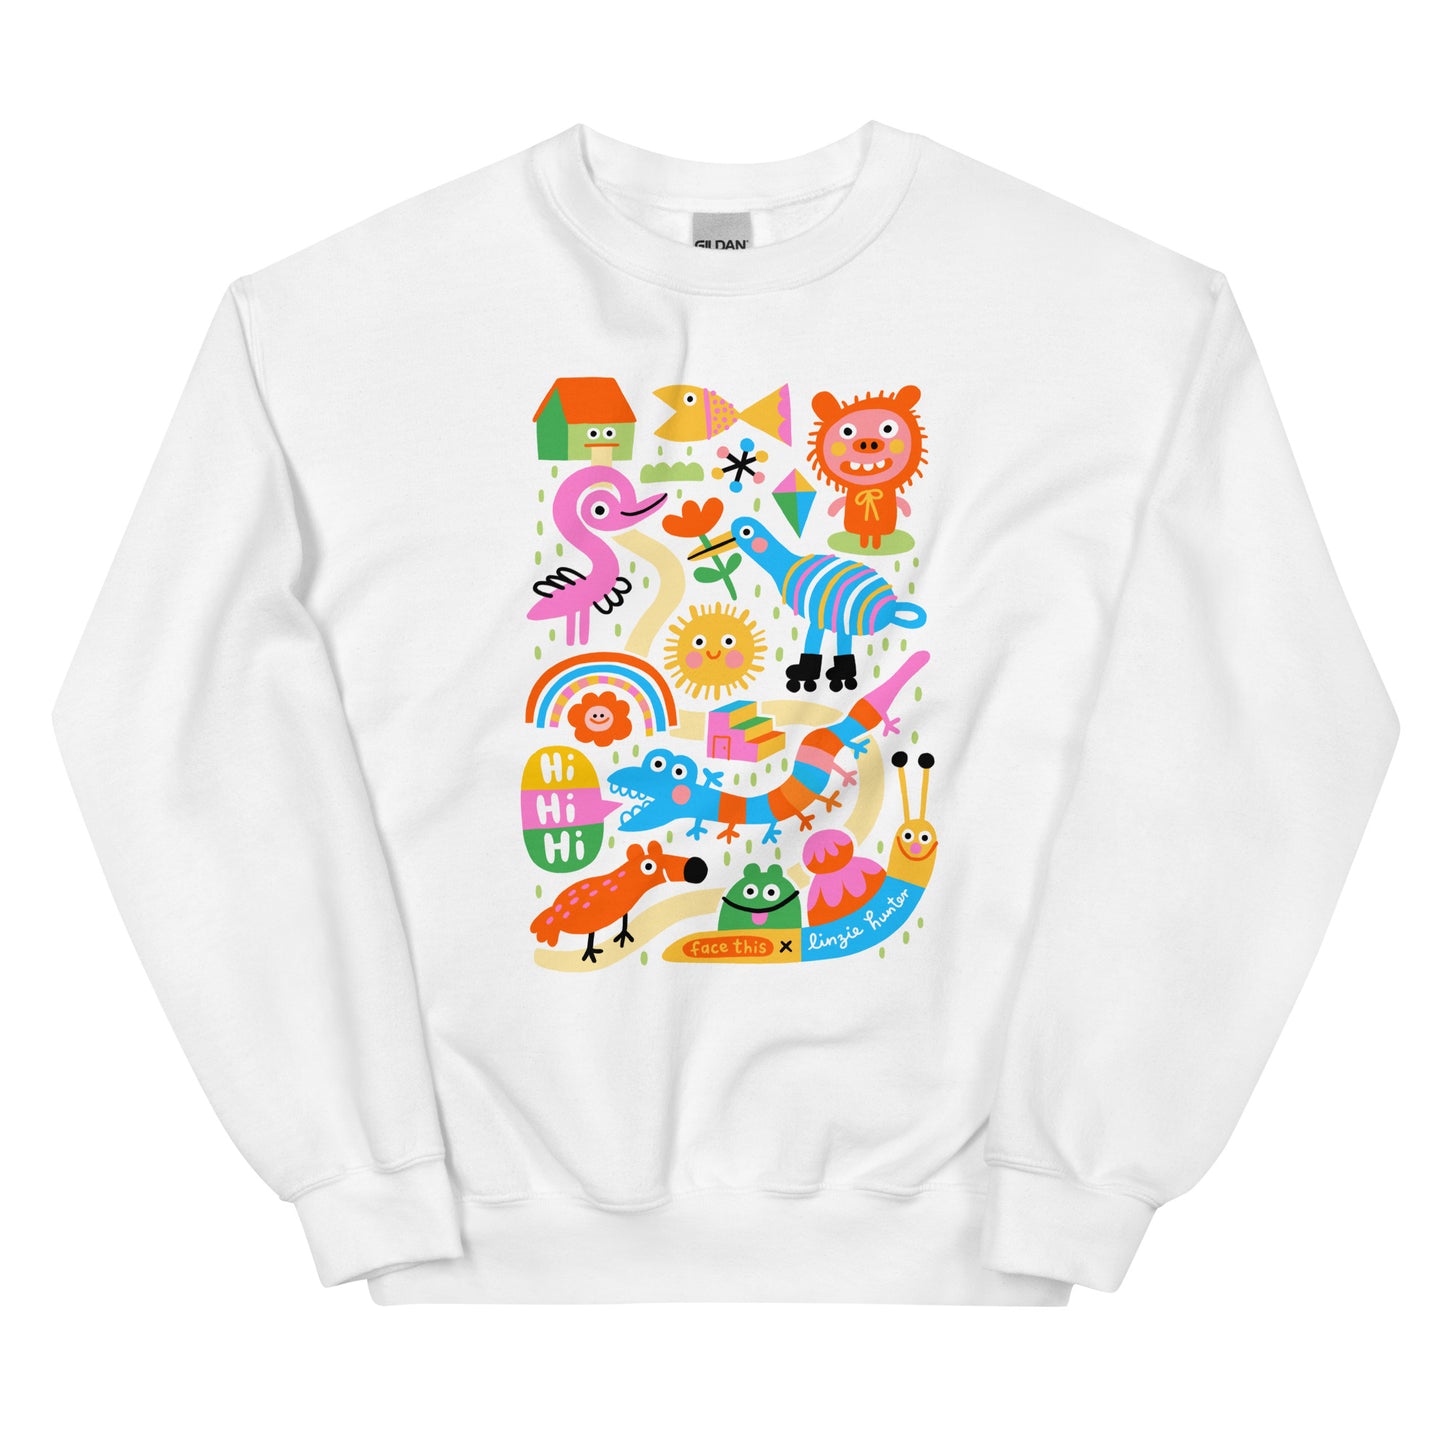 Linzie Hunter x Face This Sweater